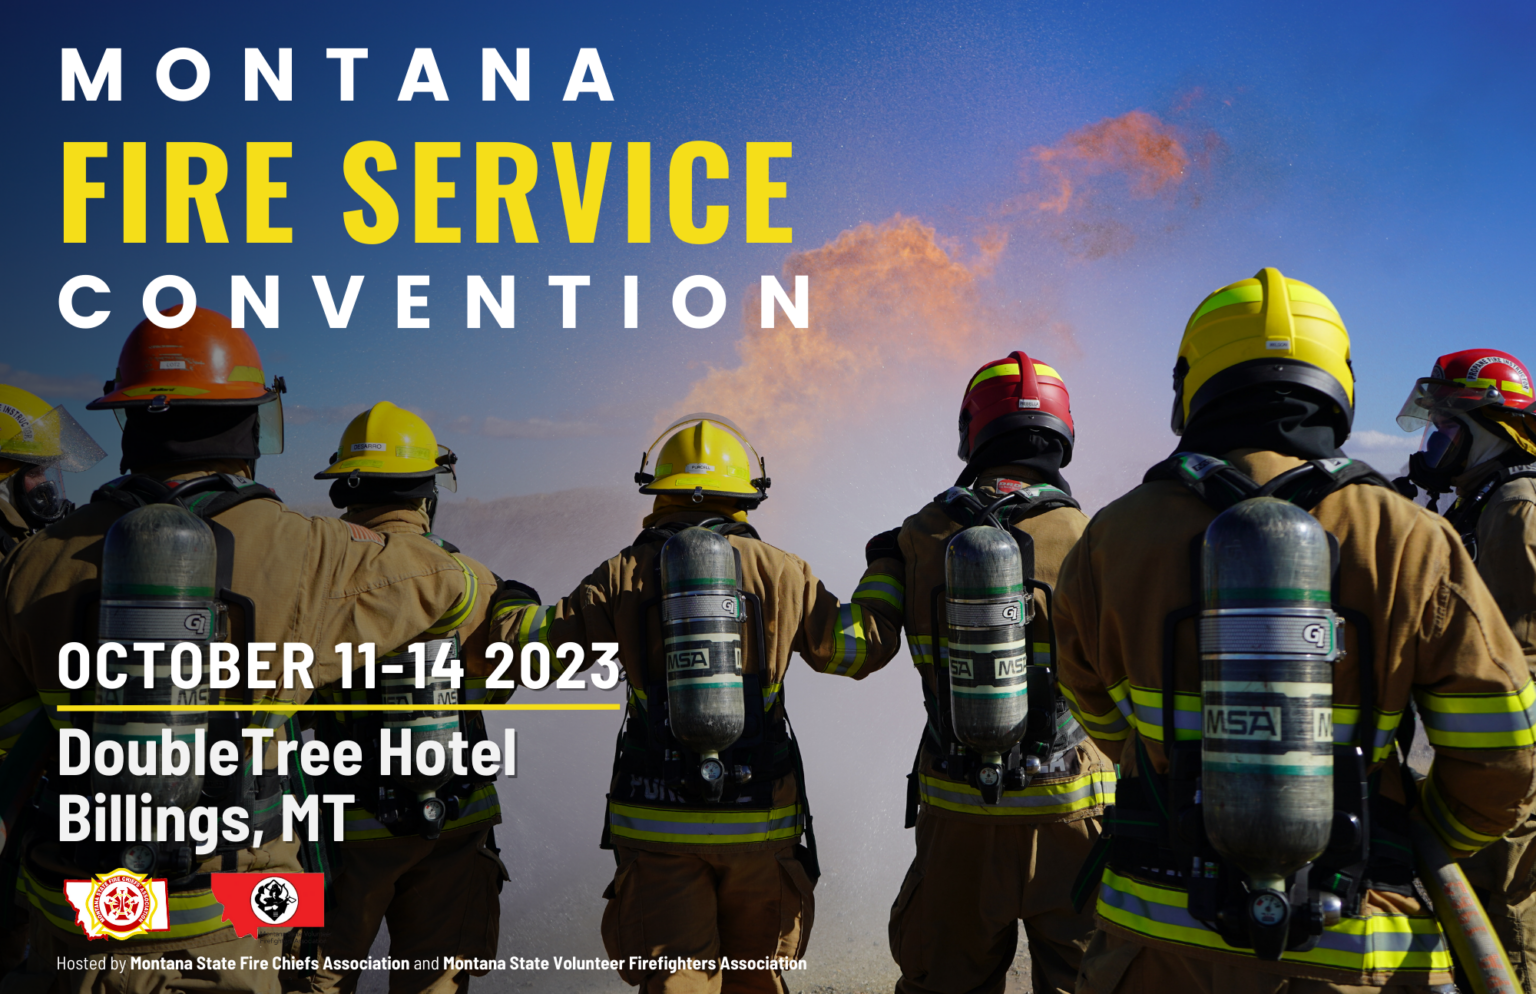 Fire Service Convention The Montana State Fire Chiefs' Association